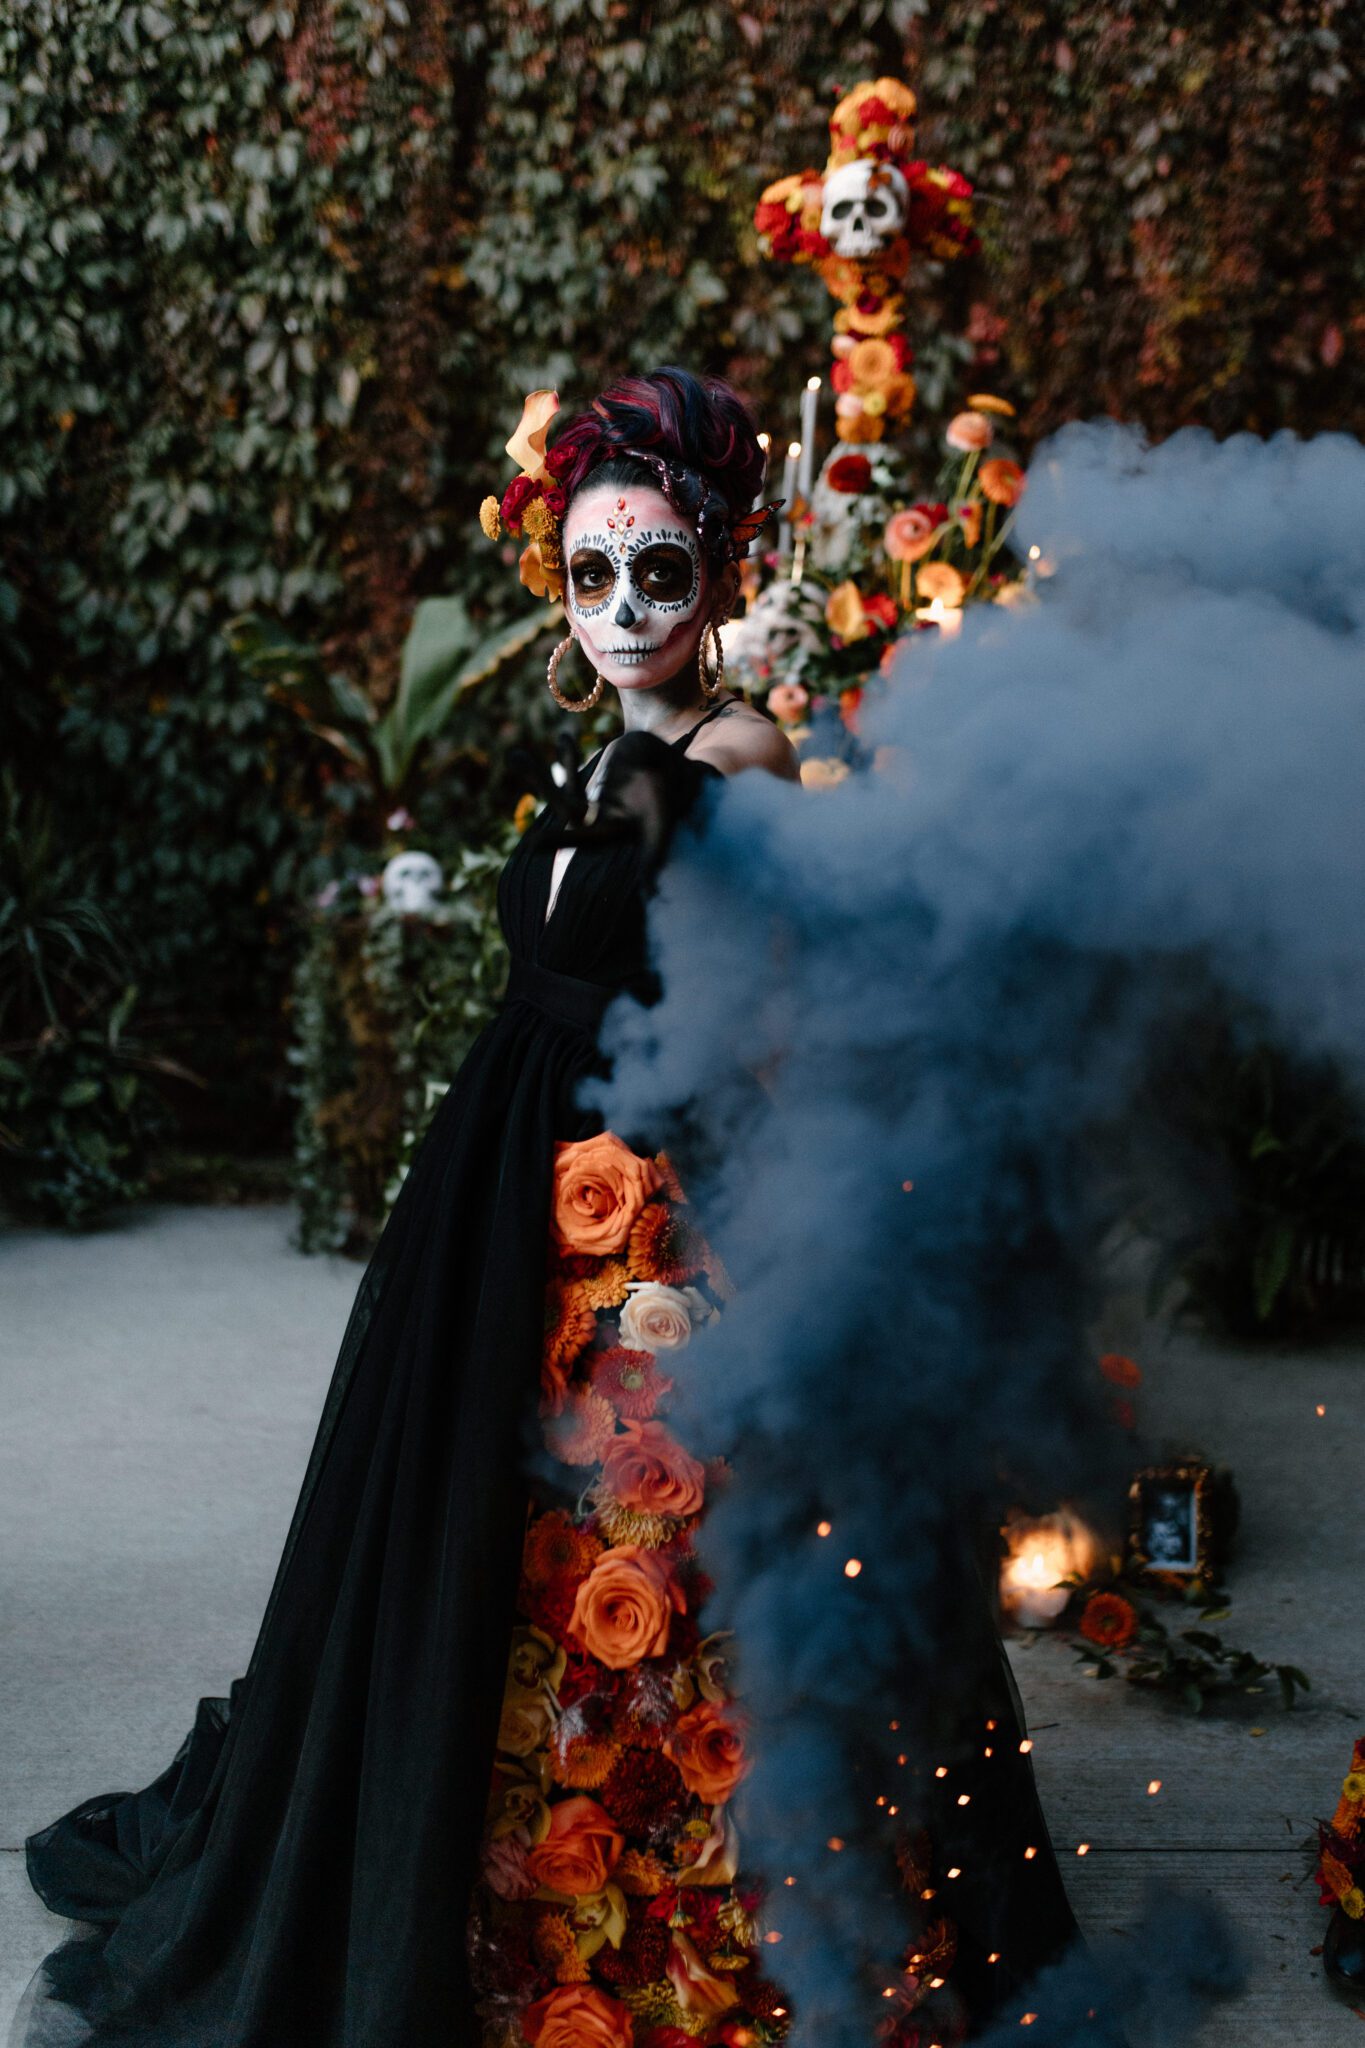 Black smoke bomb used during halloween inspired fall photo session, captured by Nikki Collette Photography and Inspired Motion Films.